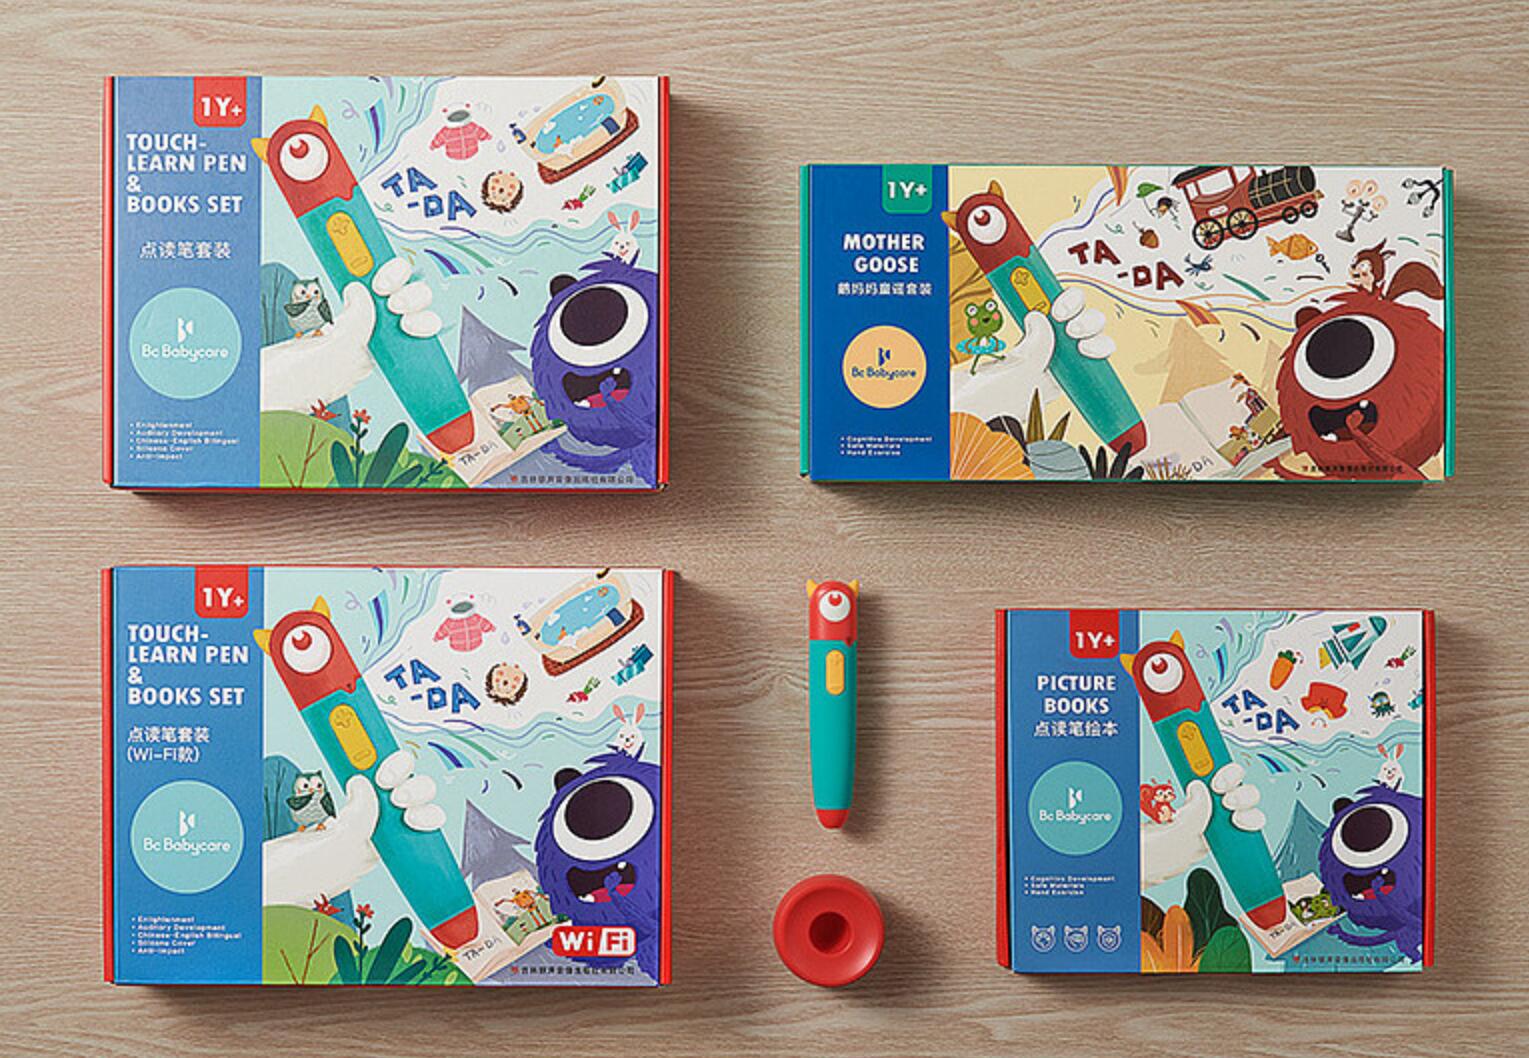 The Application of Fun Packaging Design in Children’s Products